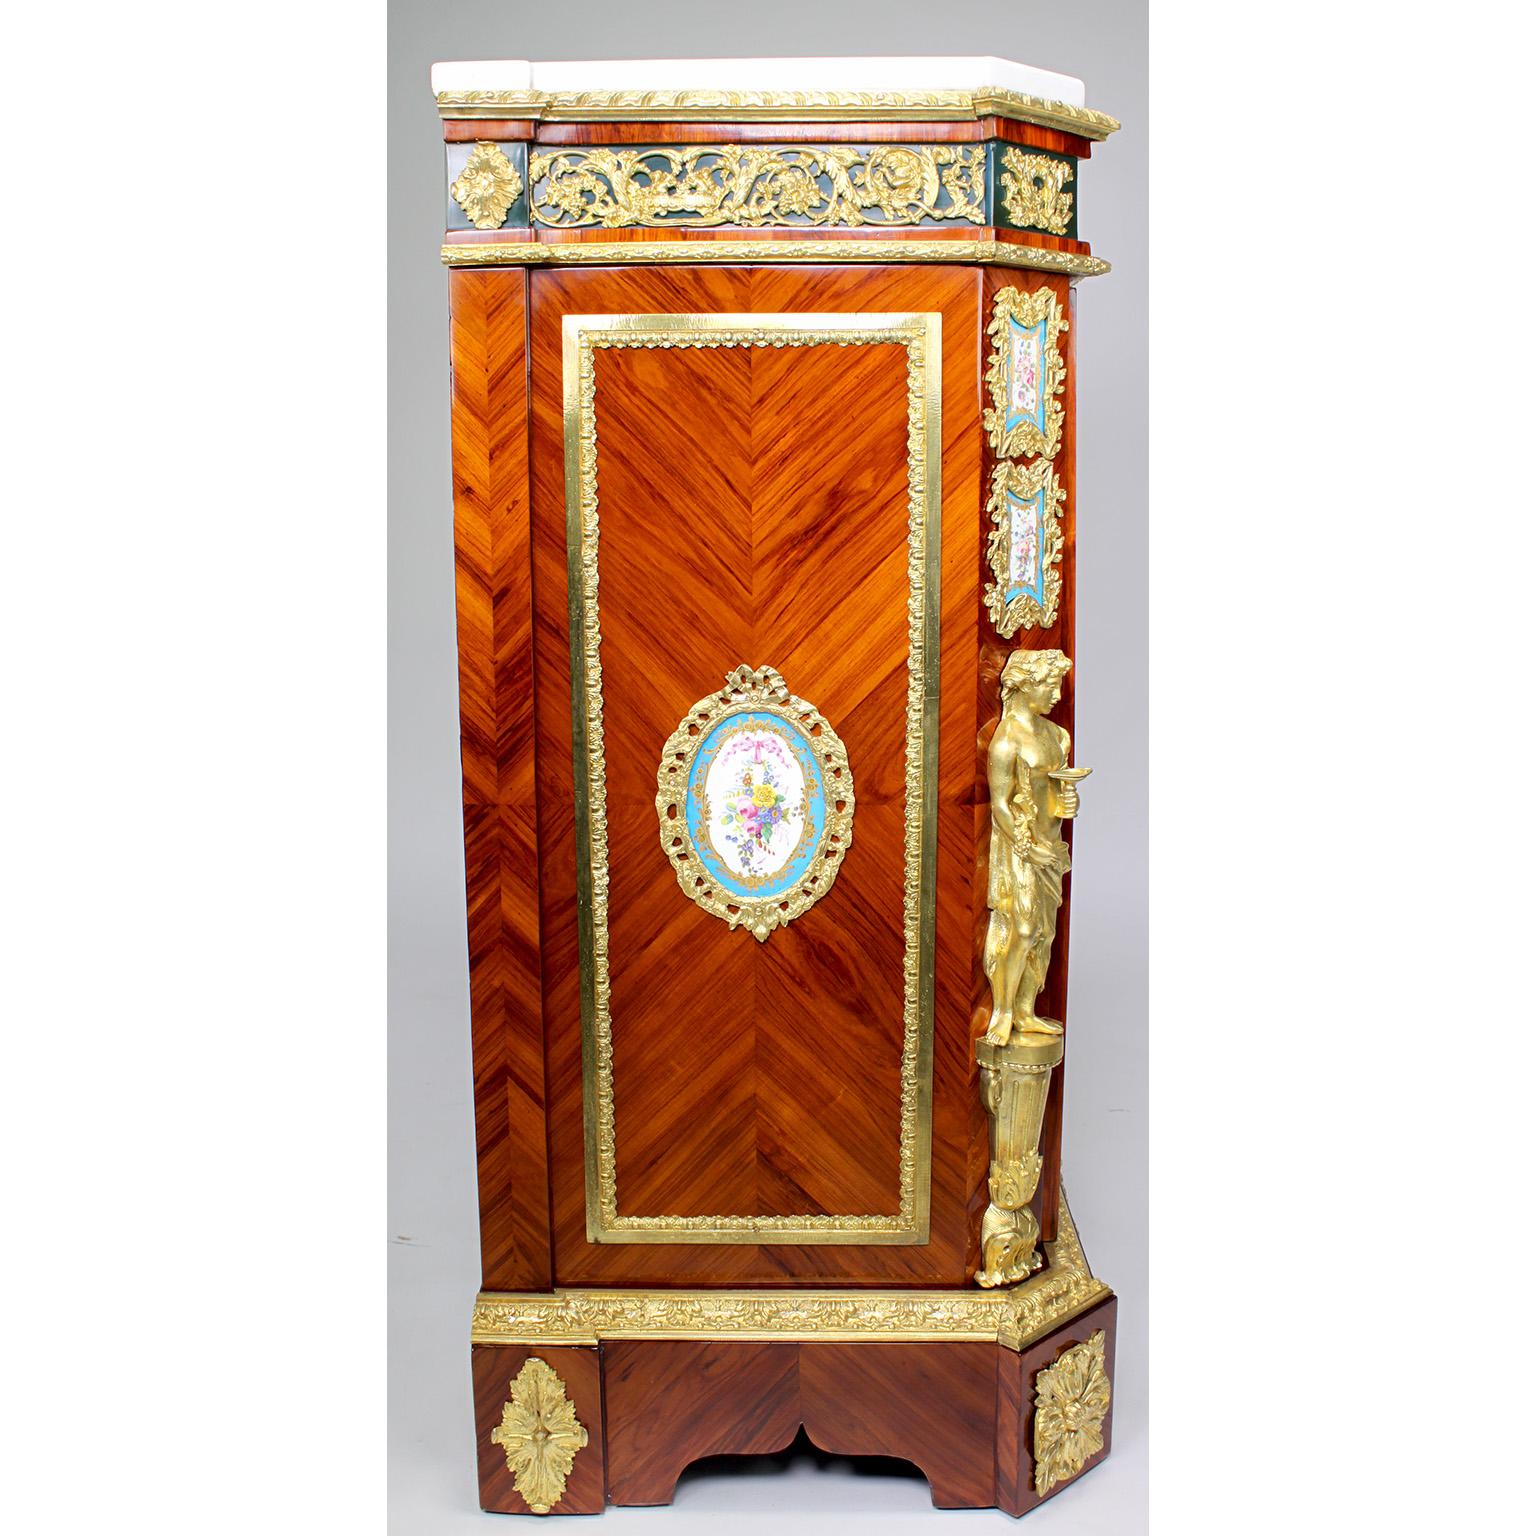 French Napoleon III Ormolu & Porcelain Mounted Cabinet Meuble D'Appui by Befort For Sale 5